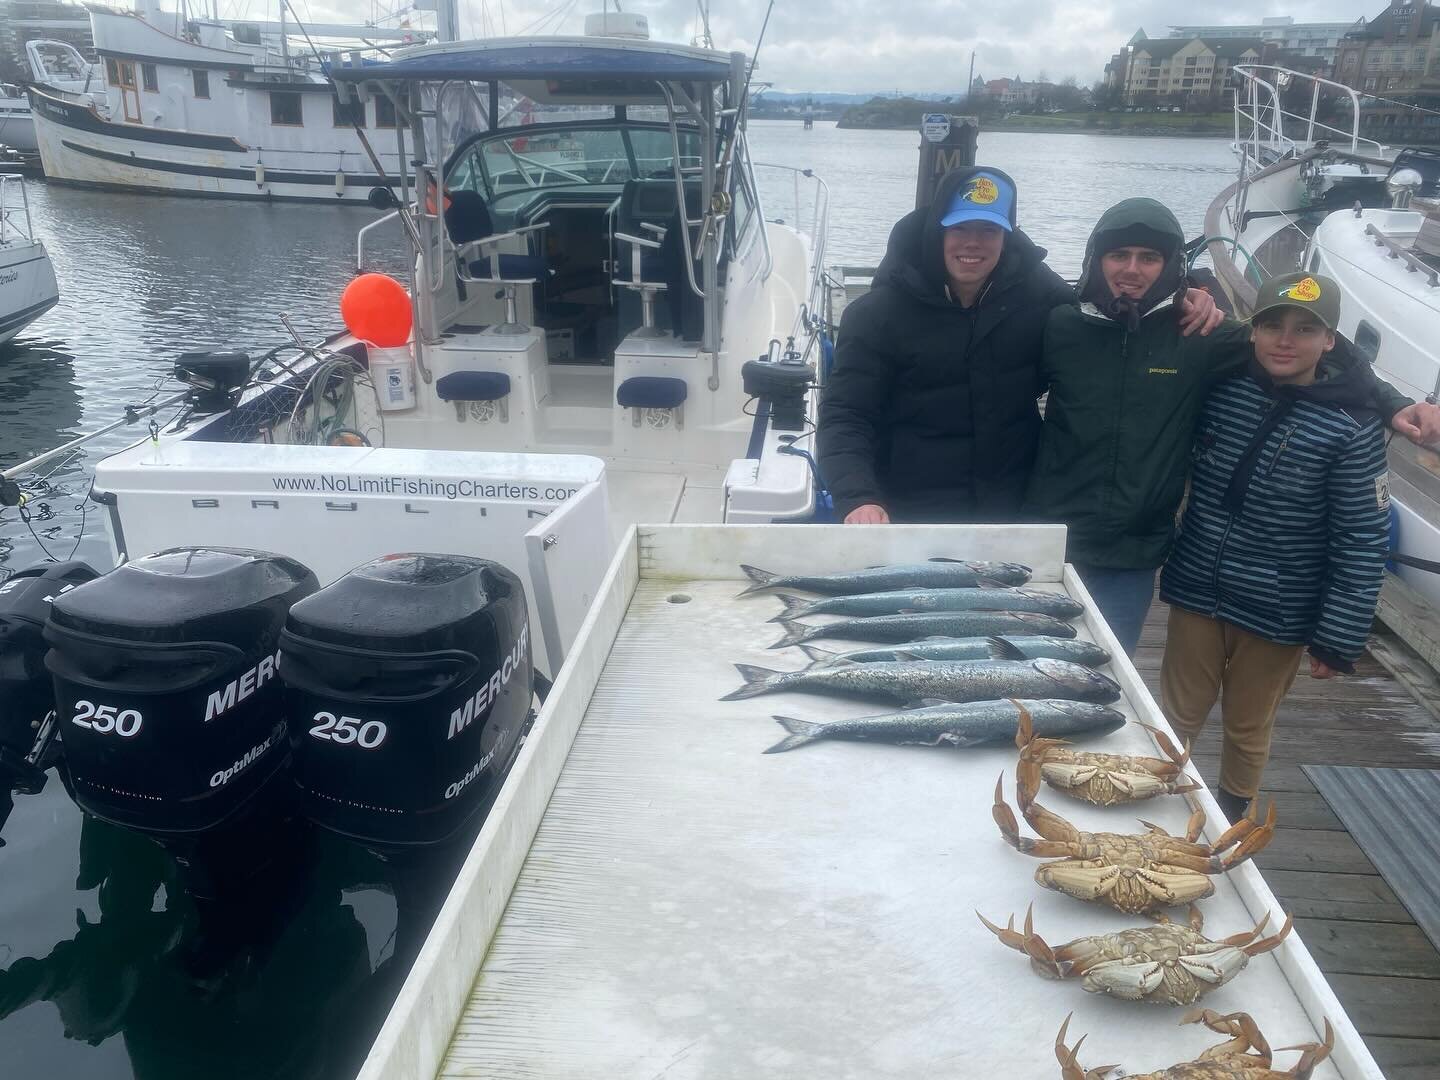 What a day, from snow to rain then blue sky followed by a blizzard full of double headers, these kids had it all! Welcome to spring break Victoria style! #blizzard #chinooksalmon #tourismvictora #westcoast #crab #springbreak